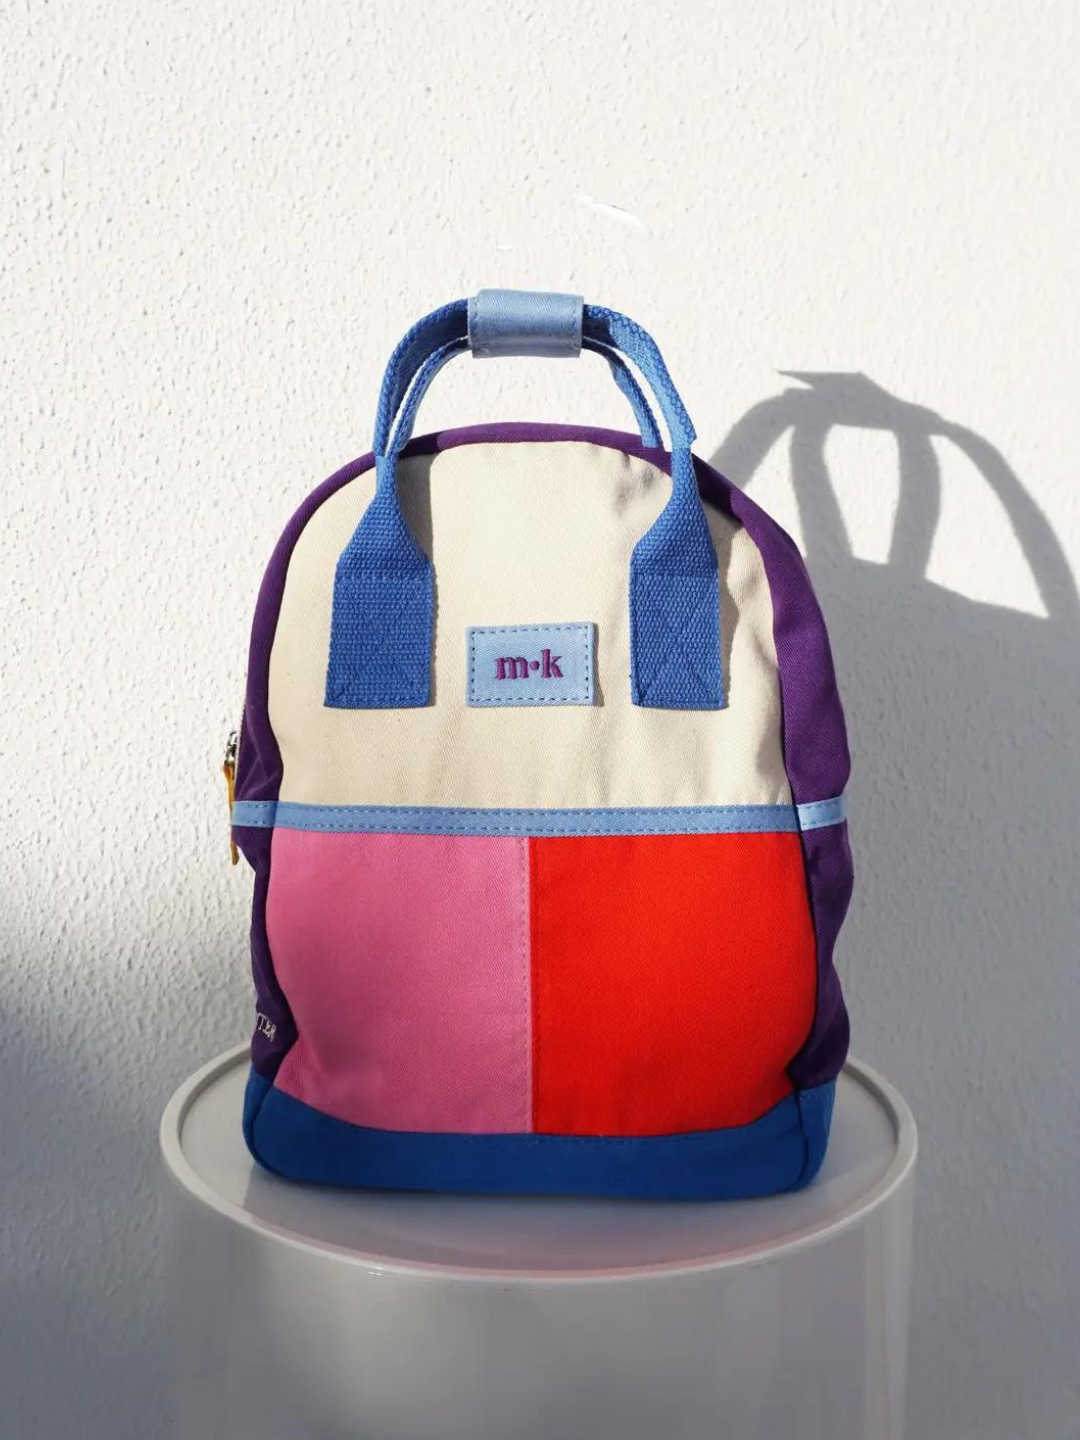 A colorblock backpack with bright blue handles and base, purple sides, and one pink, one red patch under a cream top